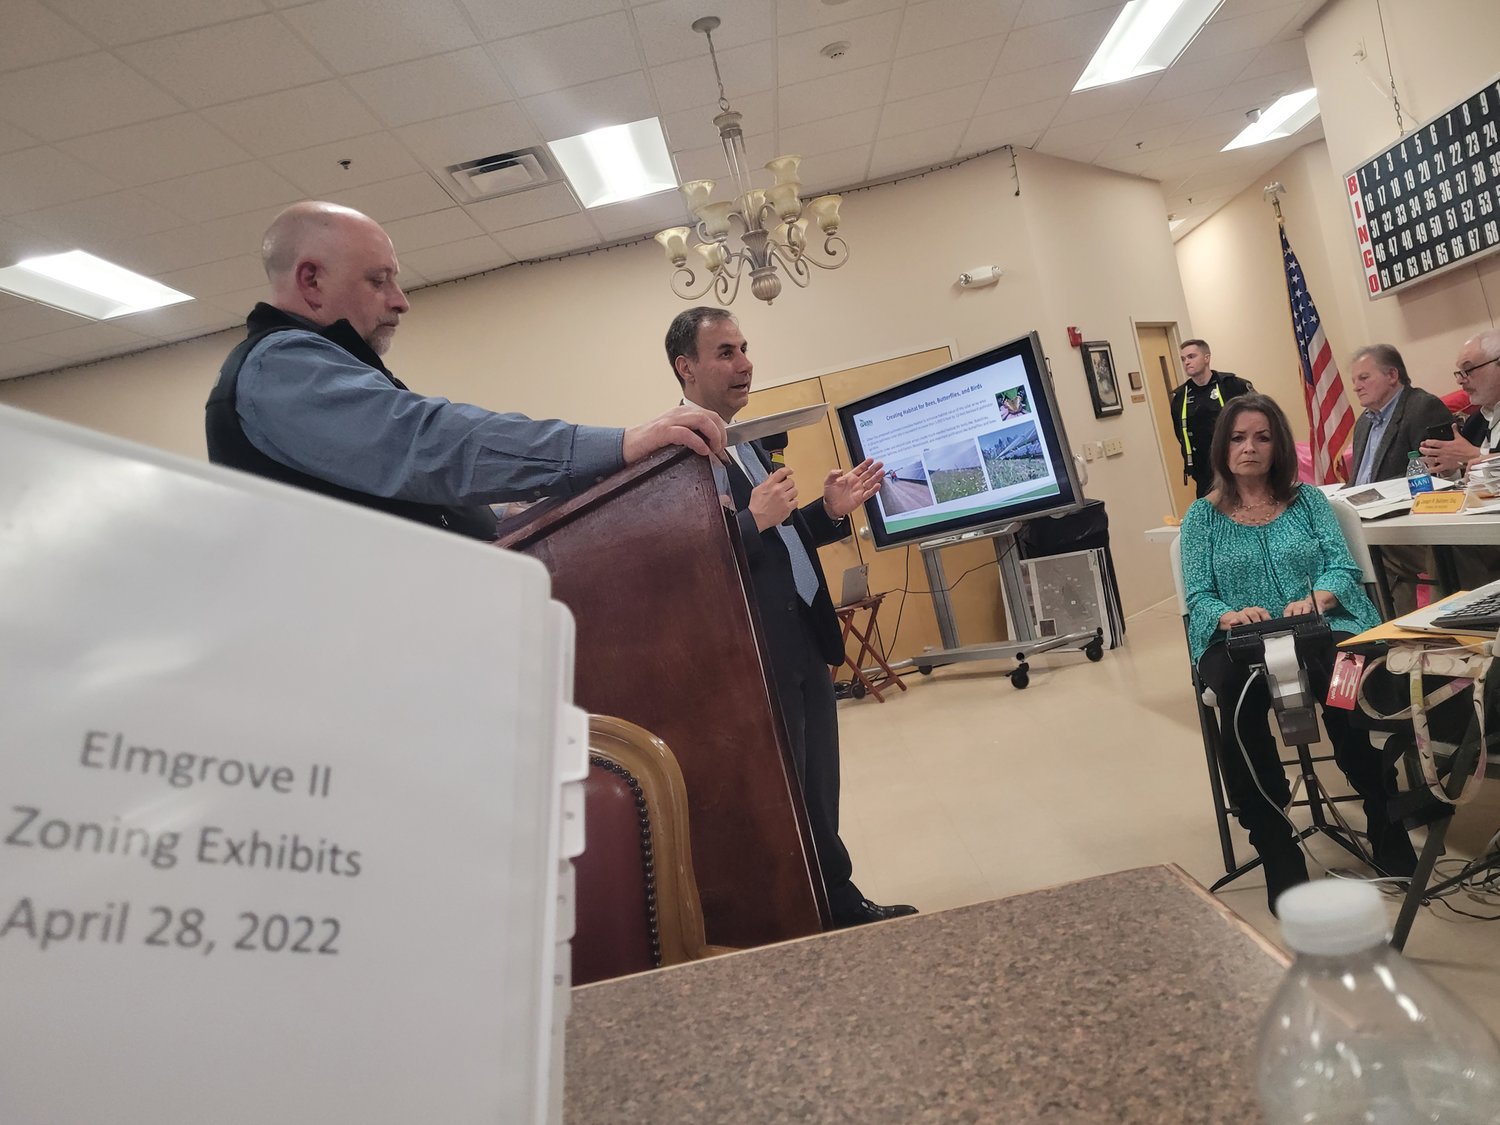 GREEN’S CASE: Kevin Morin, of Green Development, and their attorney, Joe Mancini, argued for solar field project special use permit approval before the Johnston Zoning Board at a public hearing on April 28.